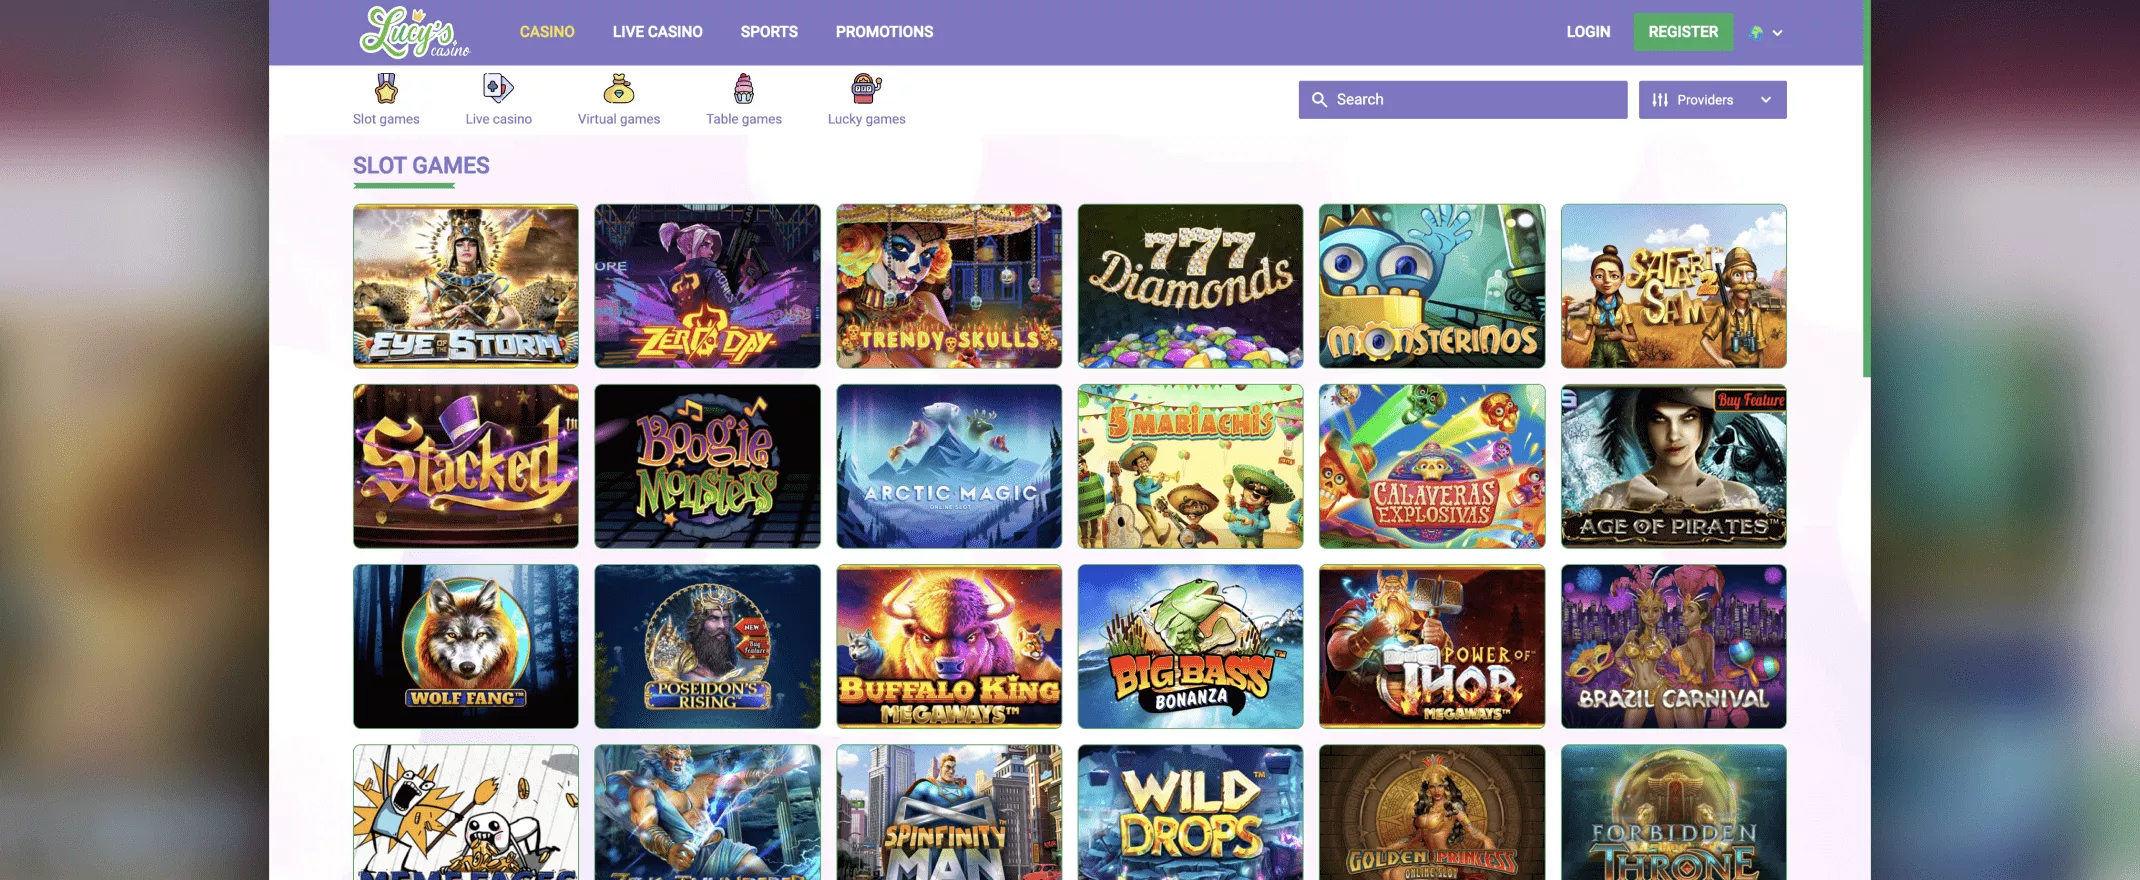 Lucy's Casino screenshot of the games page